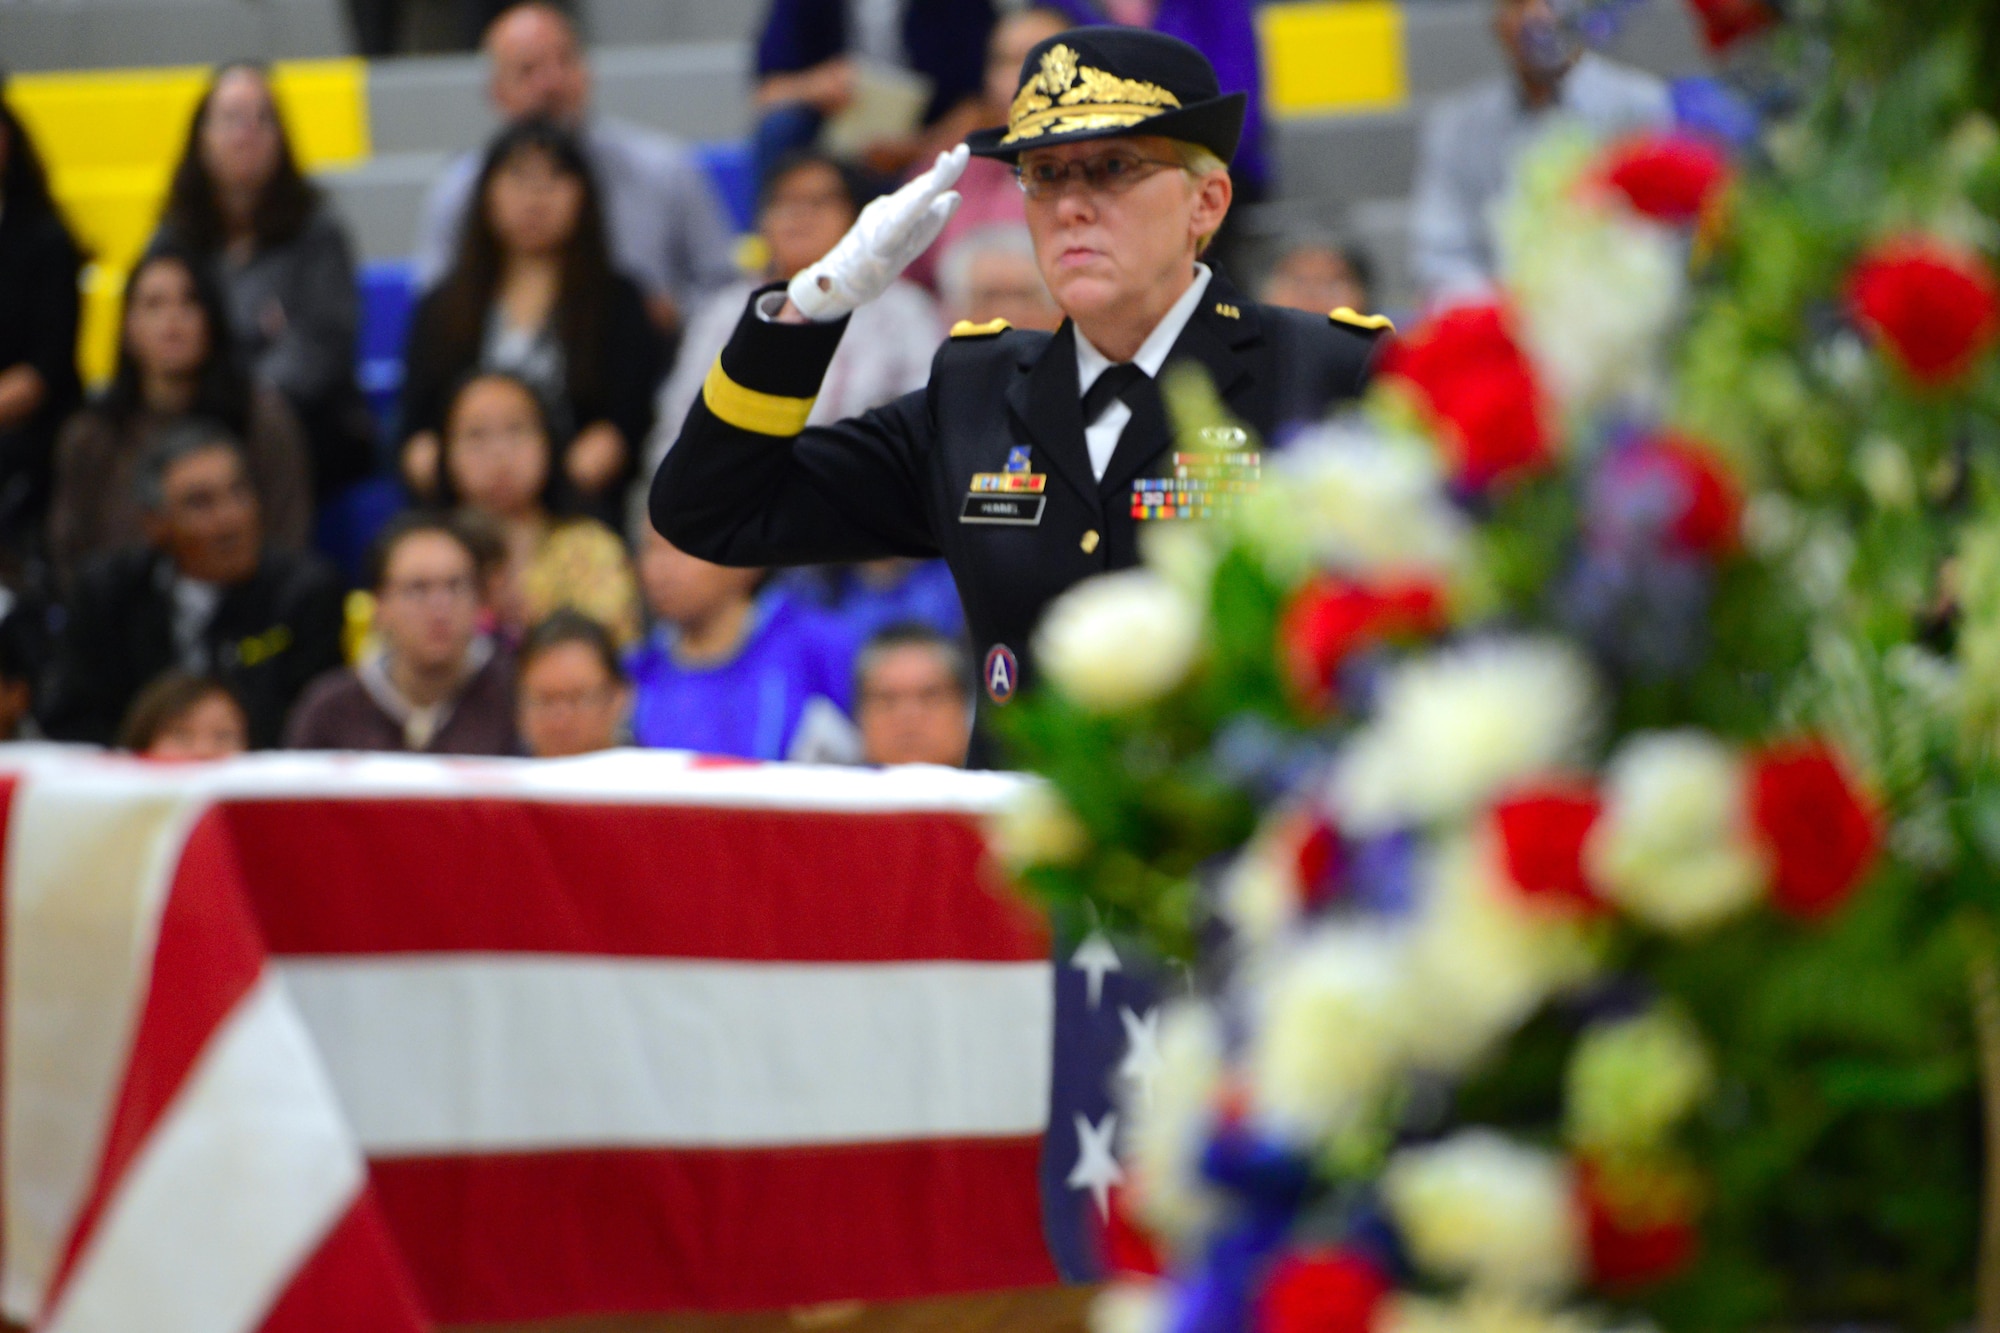 Brig. Gen. Laurie Hummel, Alaska National Guard adjutant general, salutes the casket of former Alaska Adjutant General Maj. Gen. John Schaeffer Jr, at Kotzebue, Alaska, Aug. 31, 2016. Schaeffer enlisted in the Alaska National Guard in 1957, and served for 34 years.  Schaeffer was the first Alaska Native two-star general of the Alaska National Guard and commissioner of the Alaska Department of Military and Veterans Affairs. He is survived by Mary his wife of 56 years. (U.S. Air Force photo by Airman 1st Class Javier Alvarez)